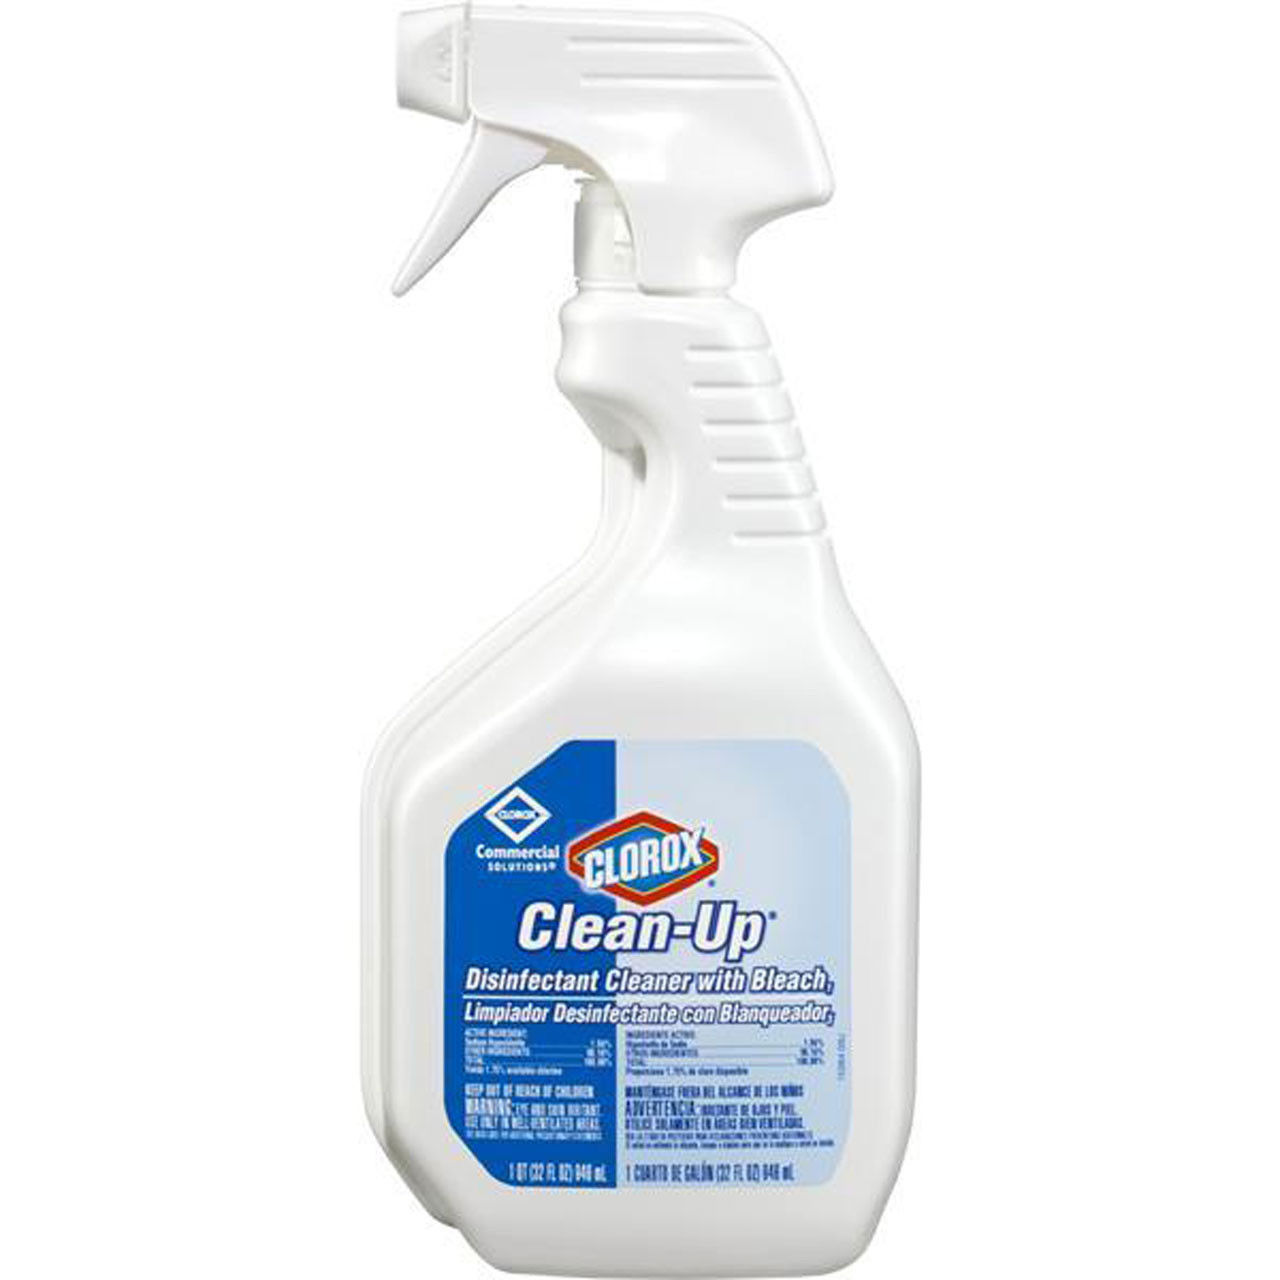 What is the ideal use for Clorox Clean-Up disinfectant spray?